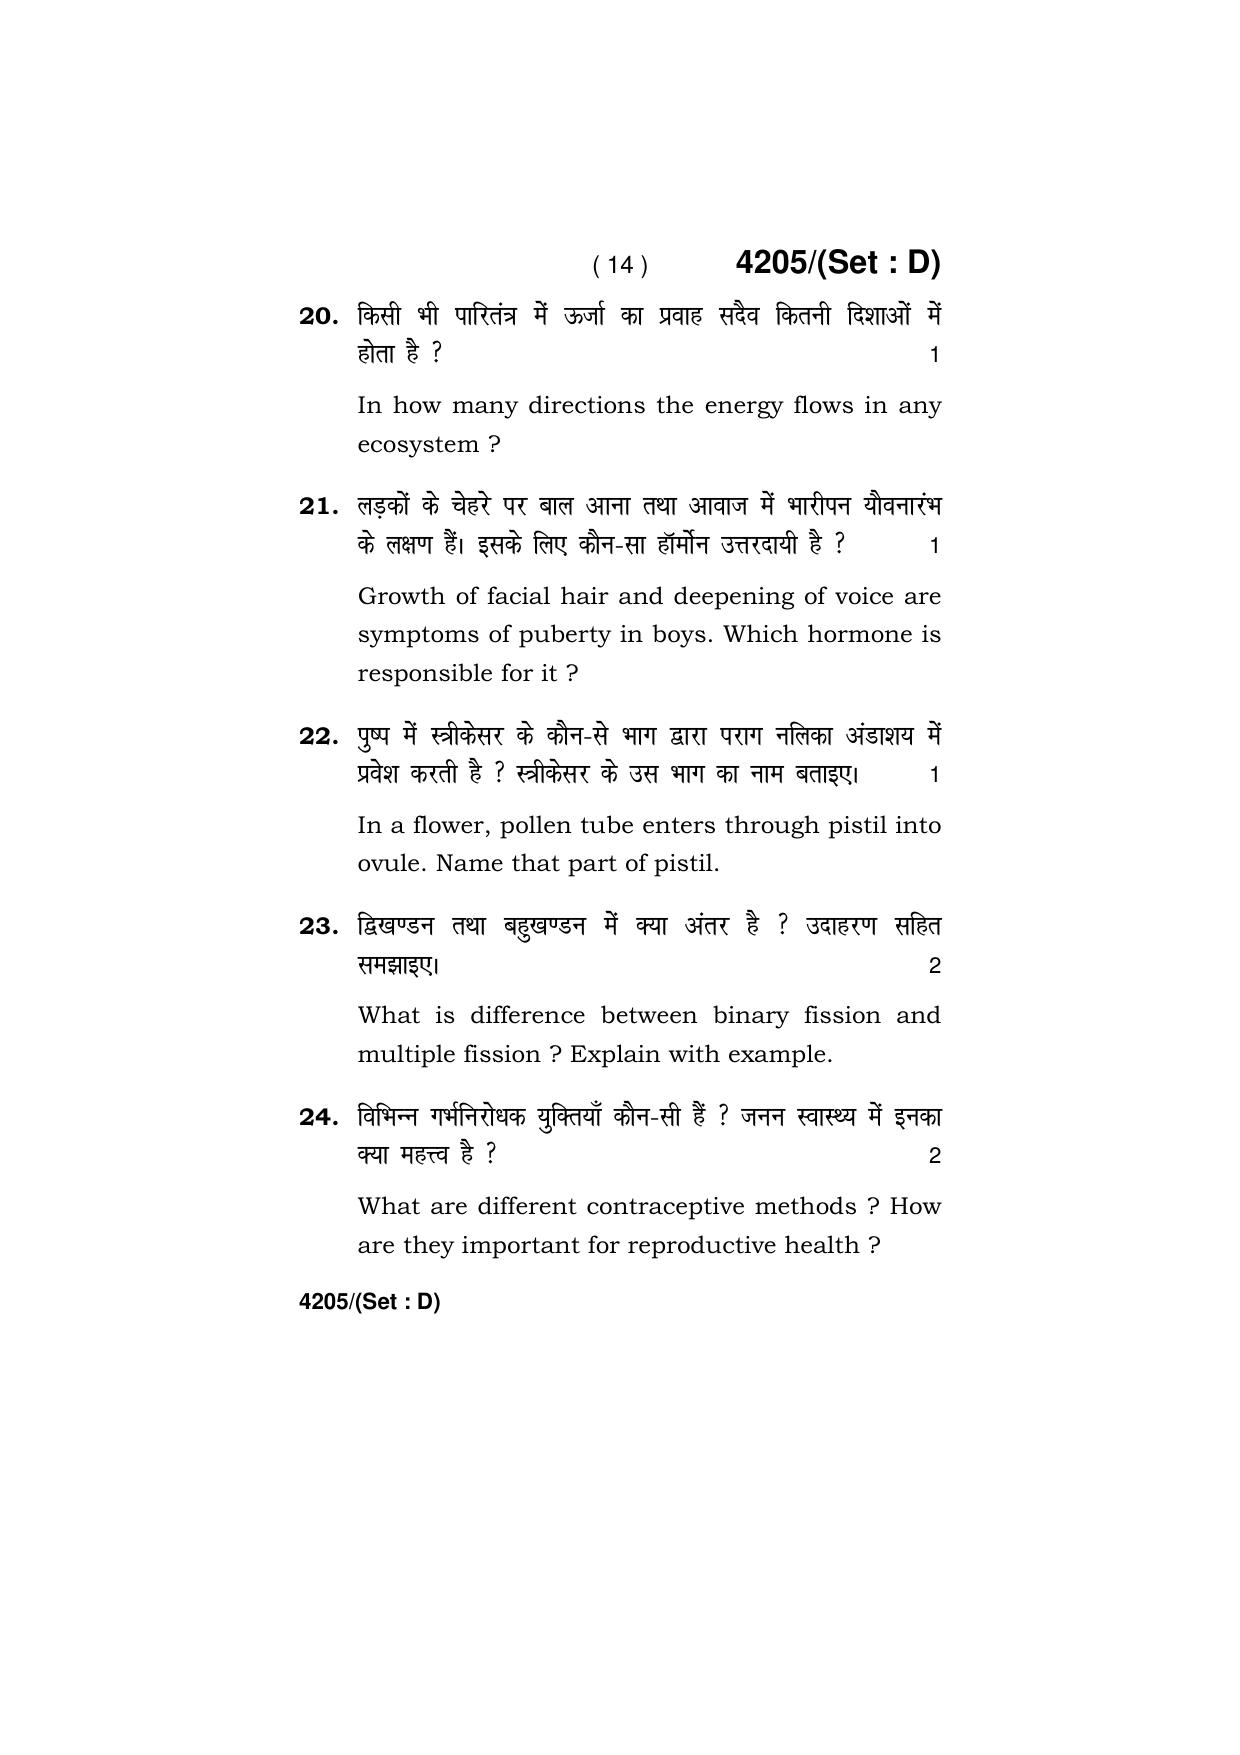 Haryana Board HBSE Class 10 Science (All Set) 2019 Question Paper - Page 62